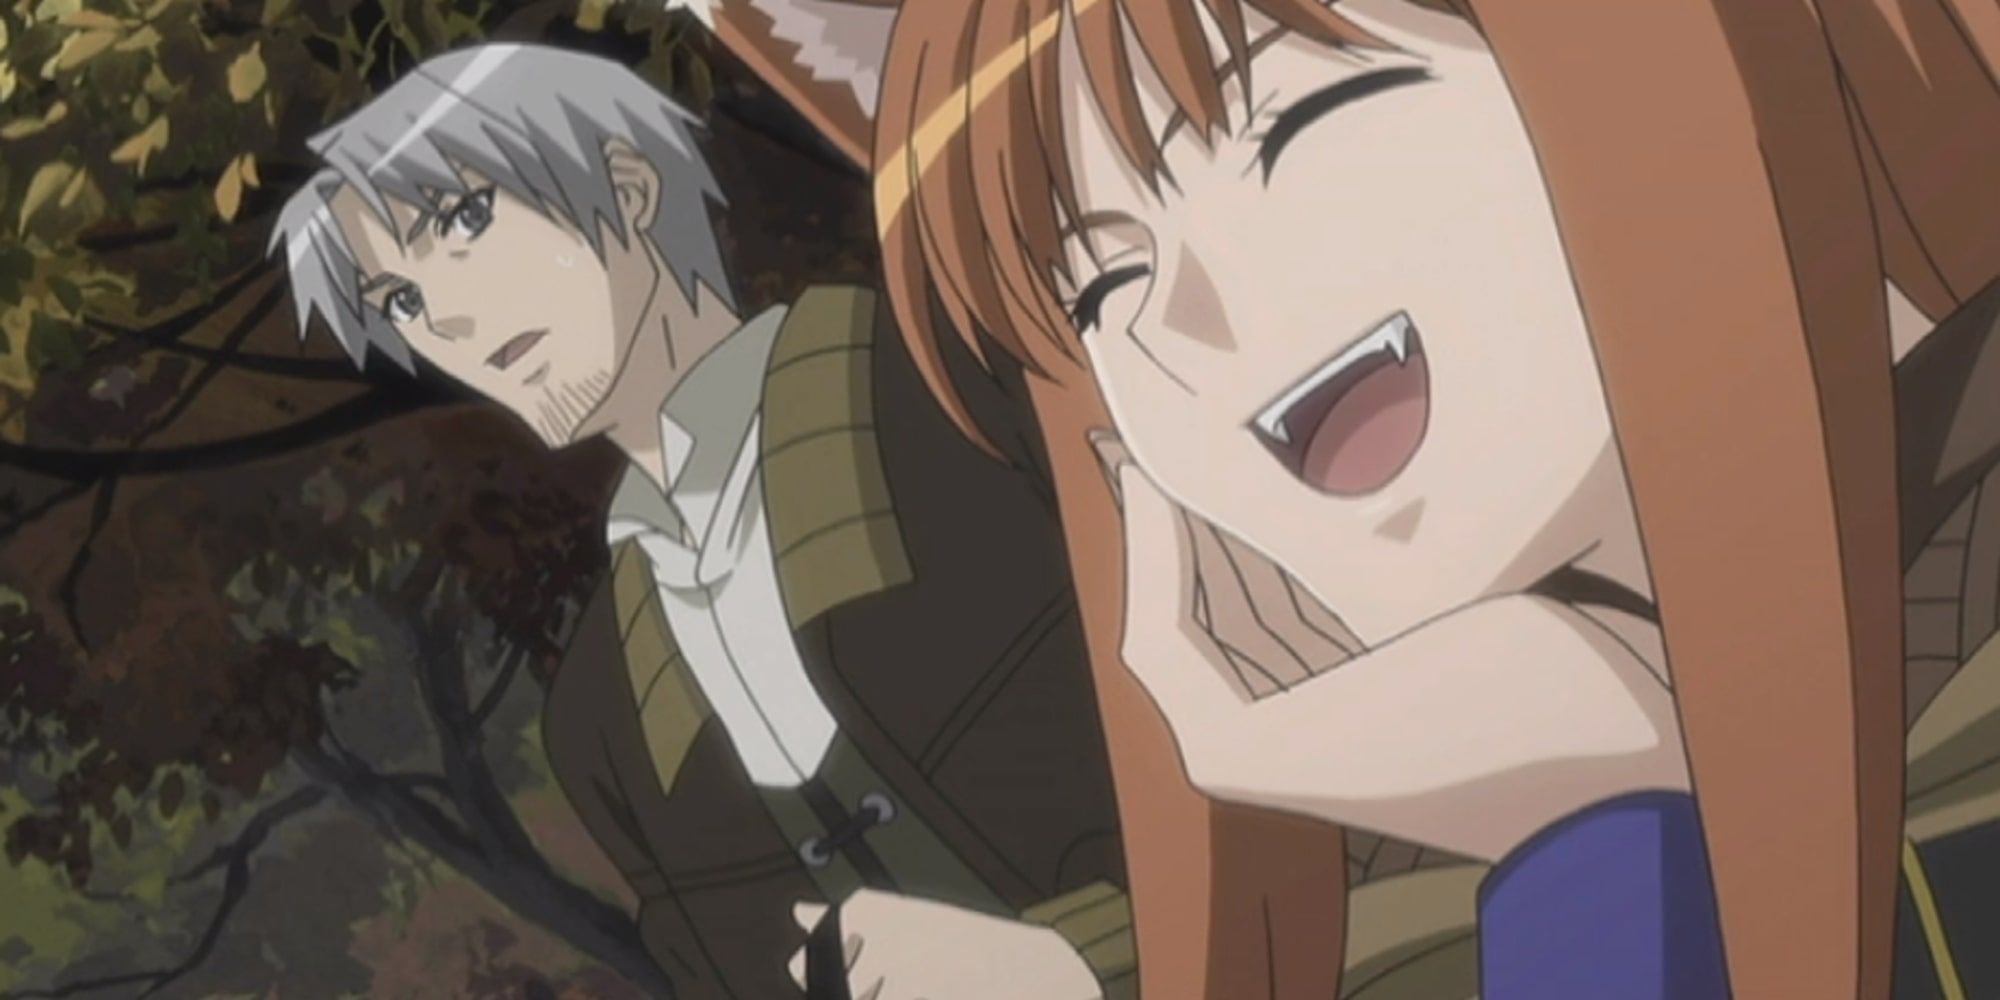 Spice and Wolf: Kraft Lawrence looking at Holo in disbelief; Holo laughing (eyes closed, mouth open)